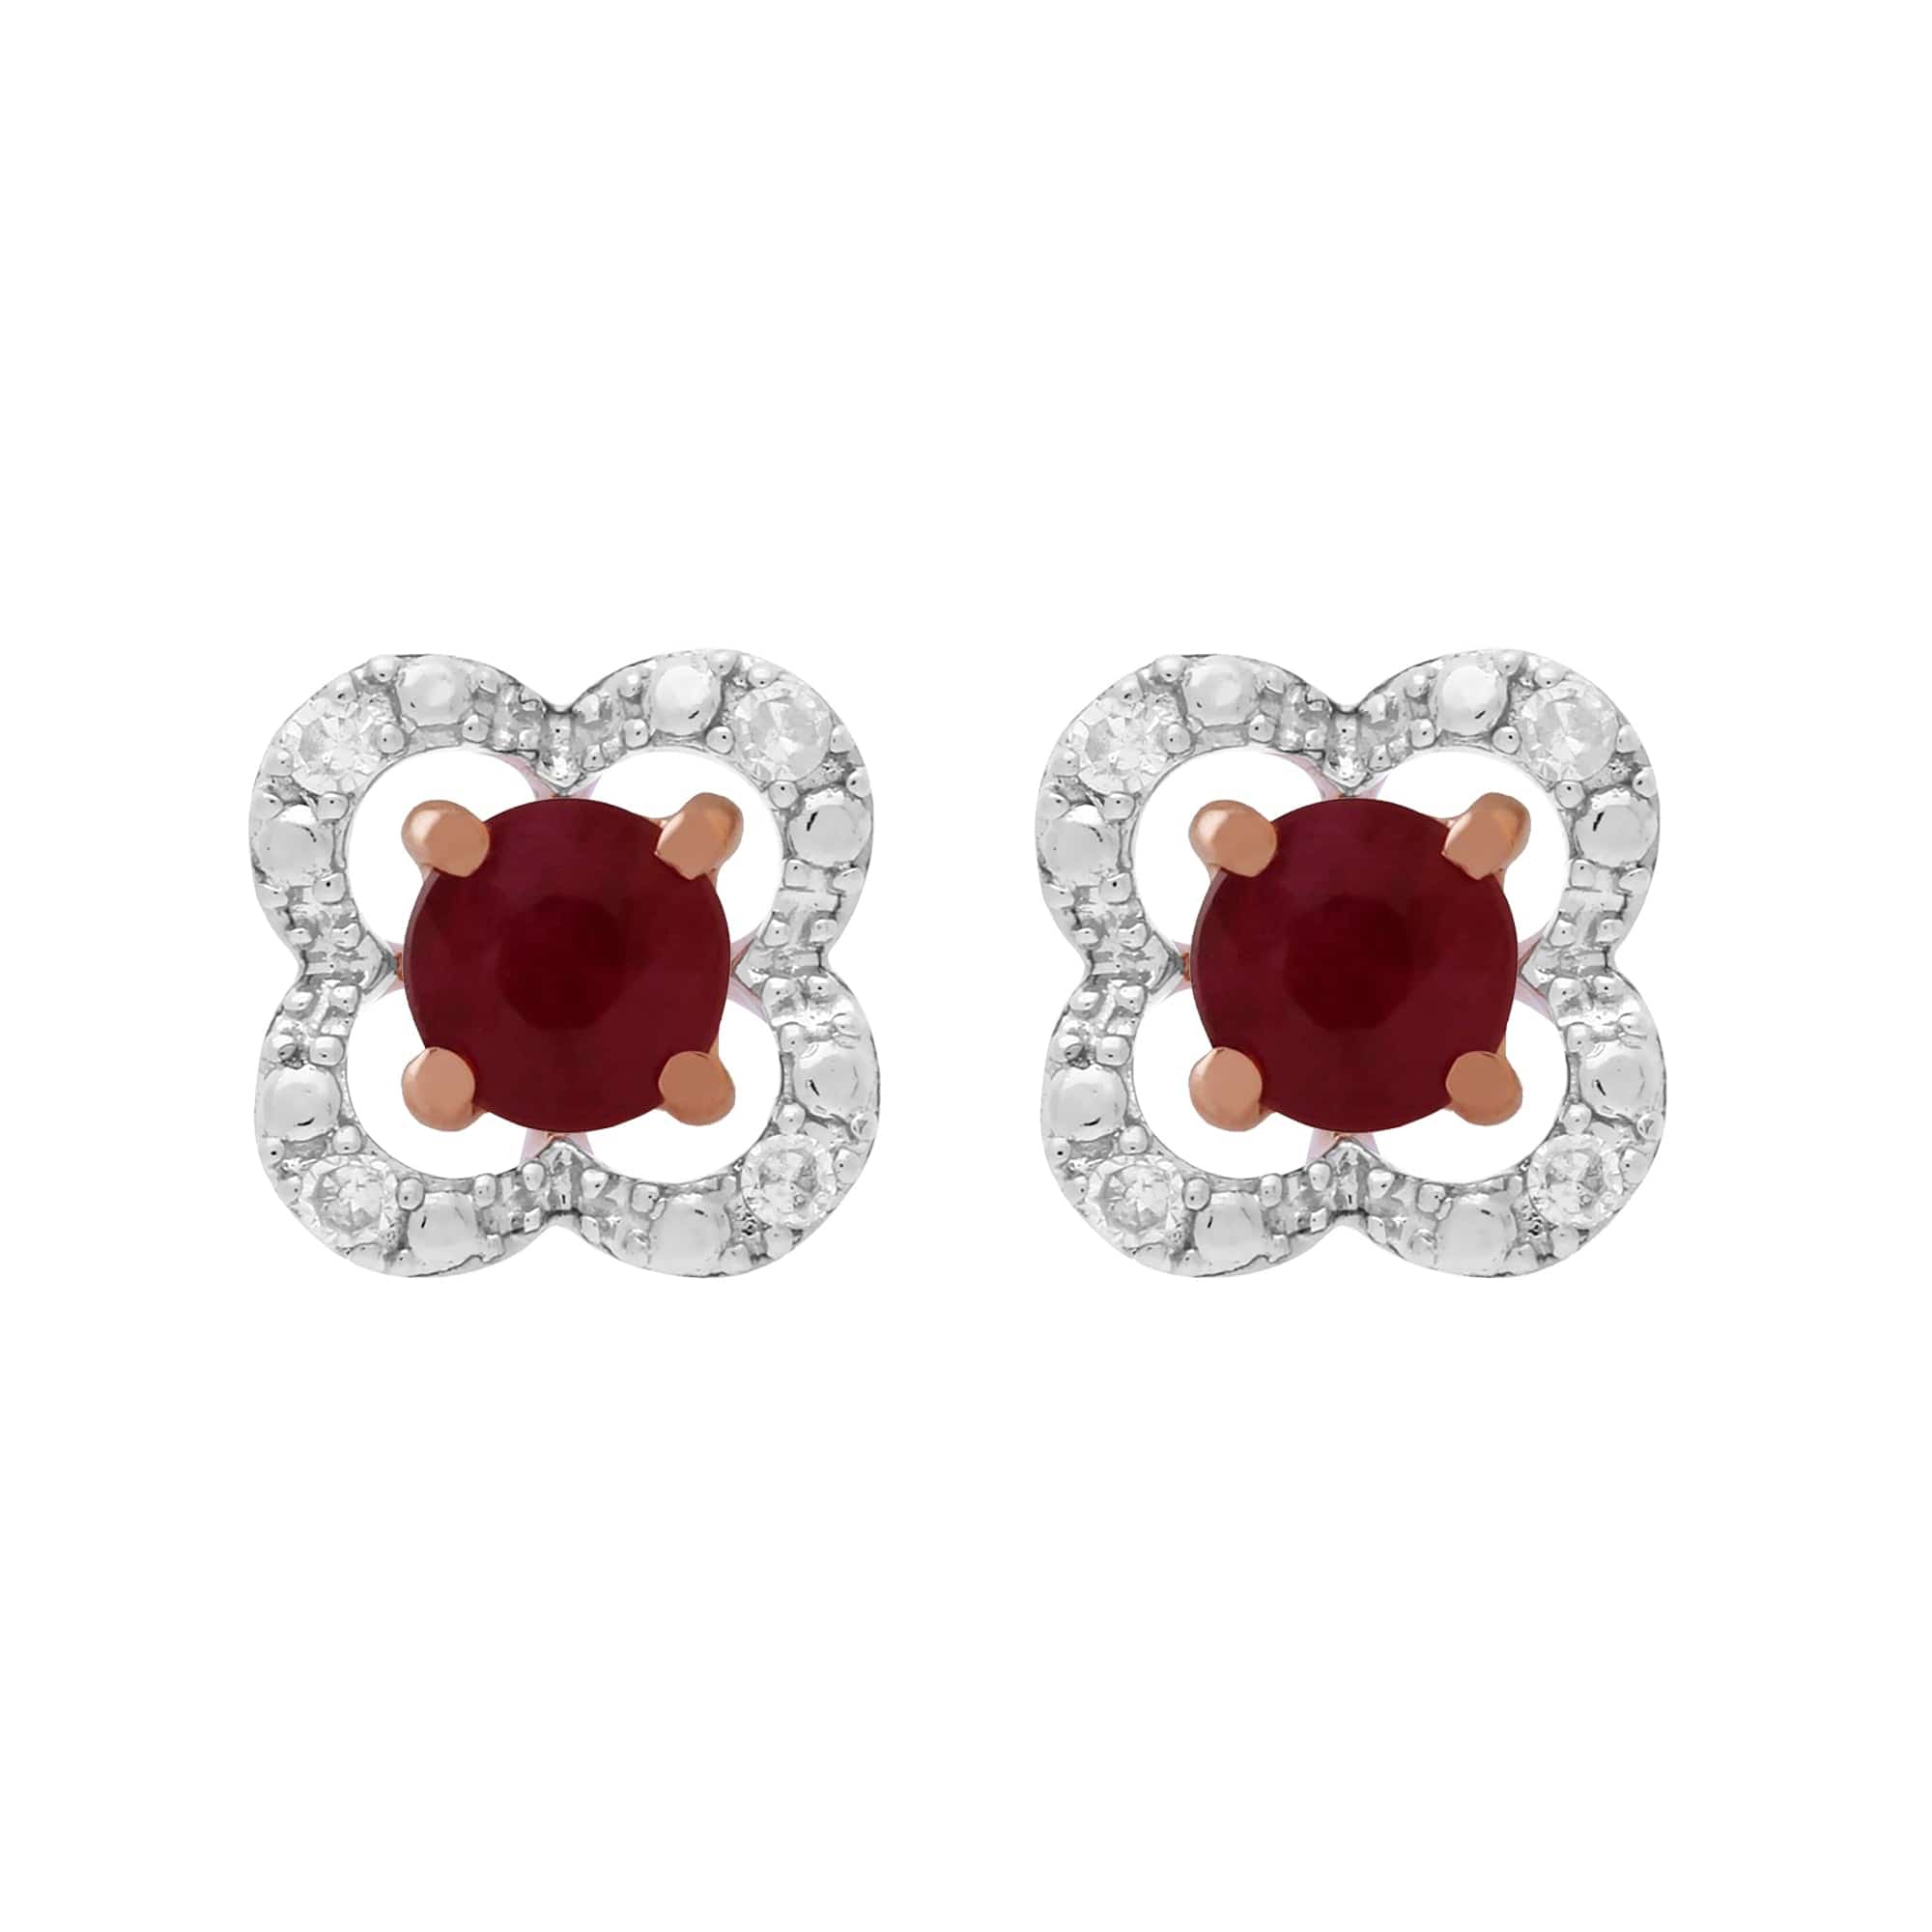 183E4316069-191E0373019 Classic Round Ruby Stud Earrings with Detachable Diamond Flower Jacket in 9ct Rose Gold 1